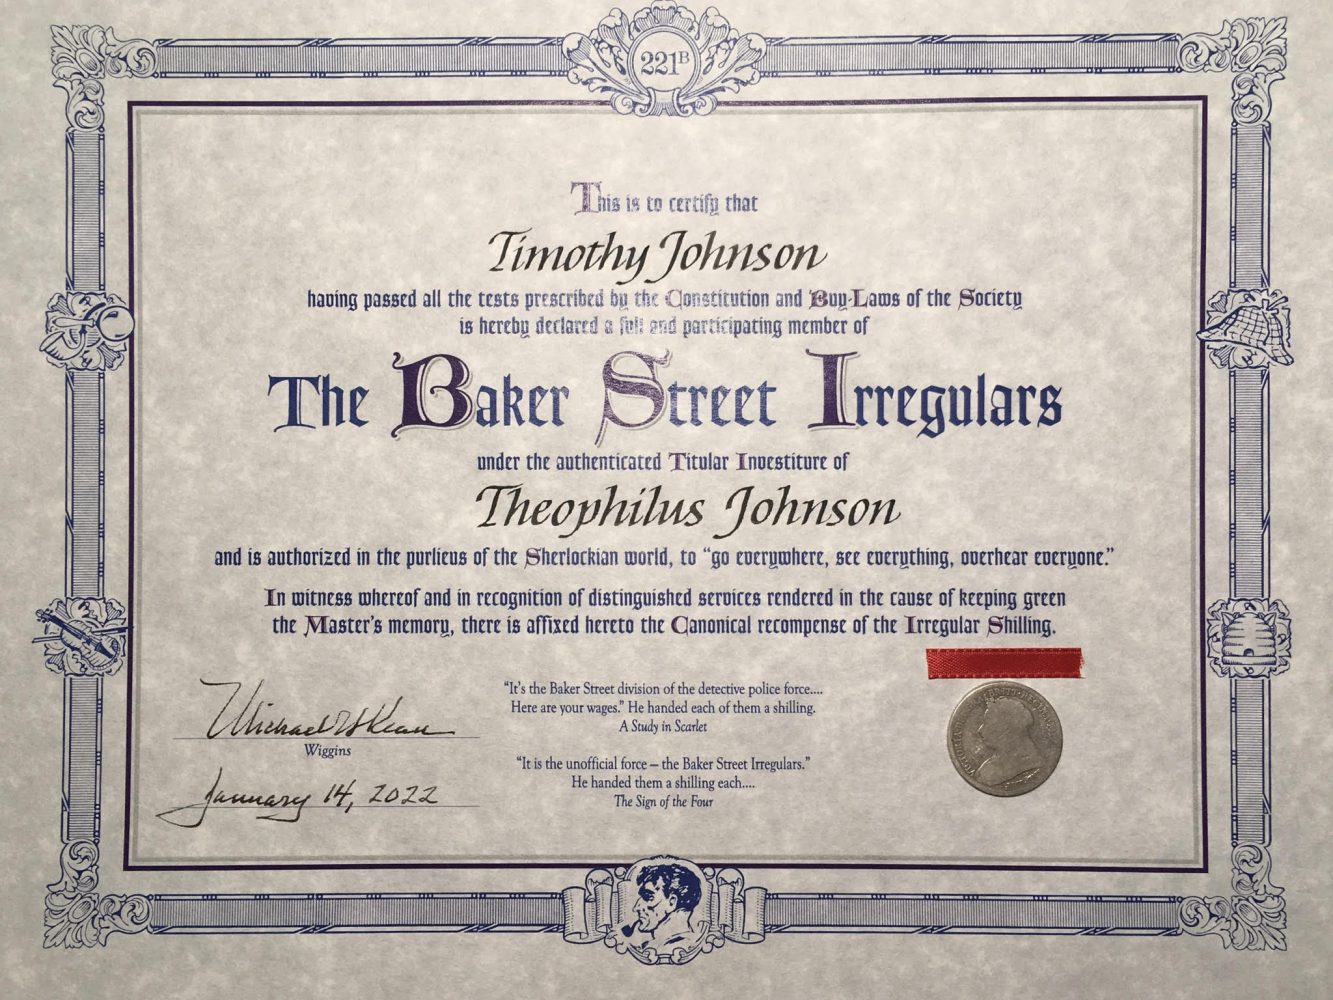 Tim Johnson, invited to become a member of the Baker Street Irregulars, received his investiture from Michael Kean. (Photo courtesy Ben Vizoskie and the Baker Street Irregulars.)